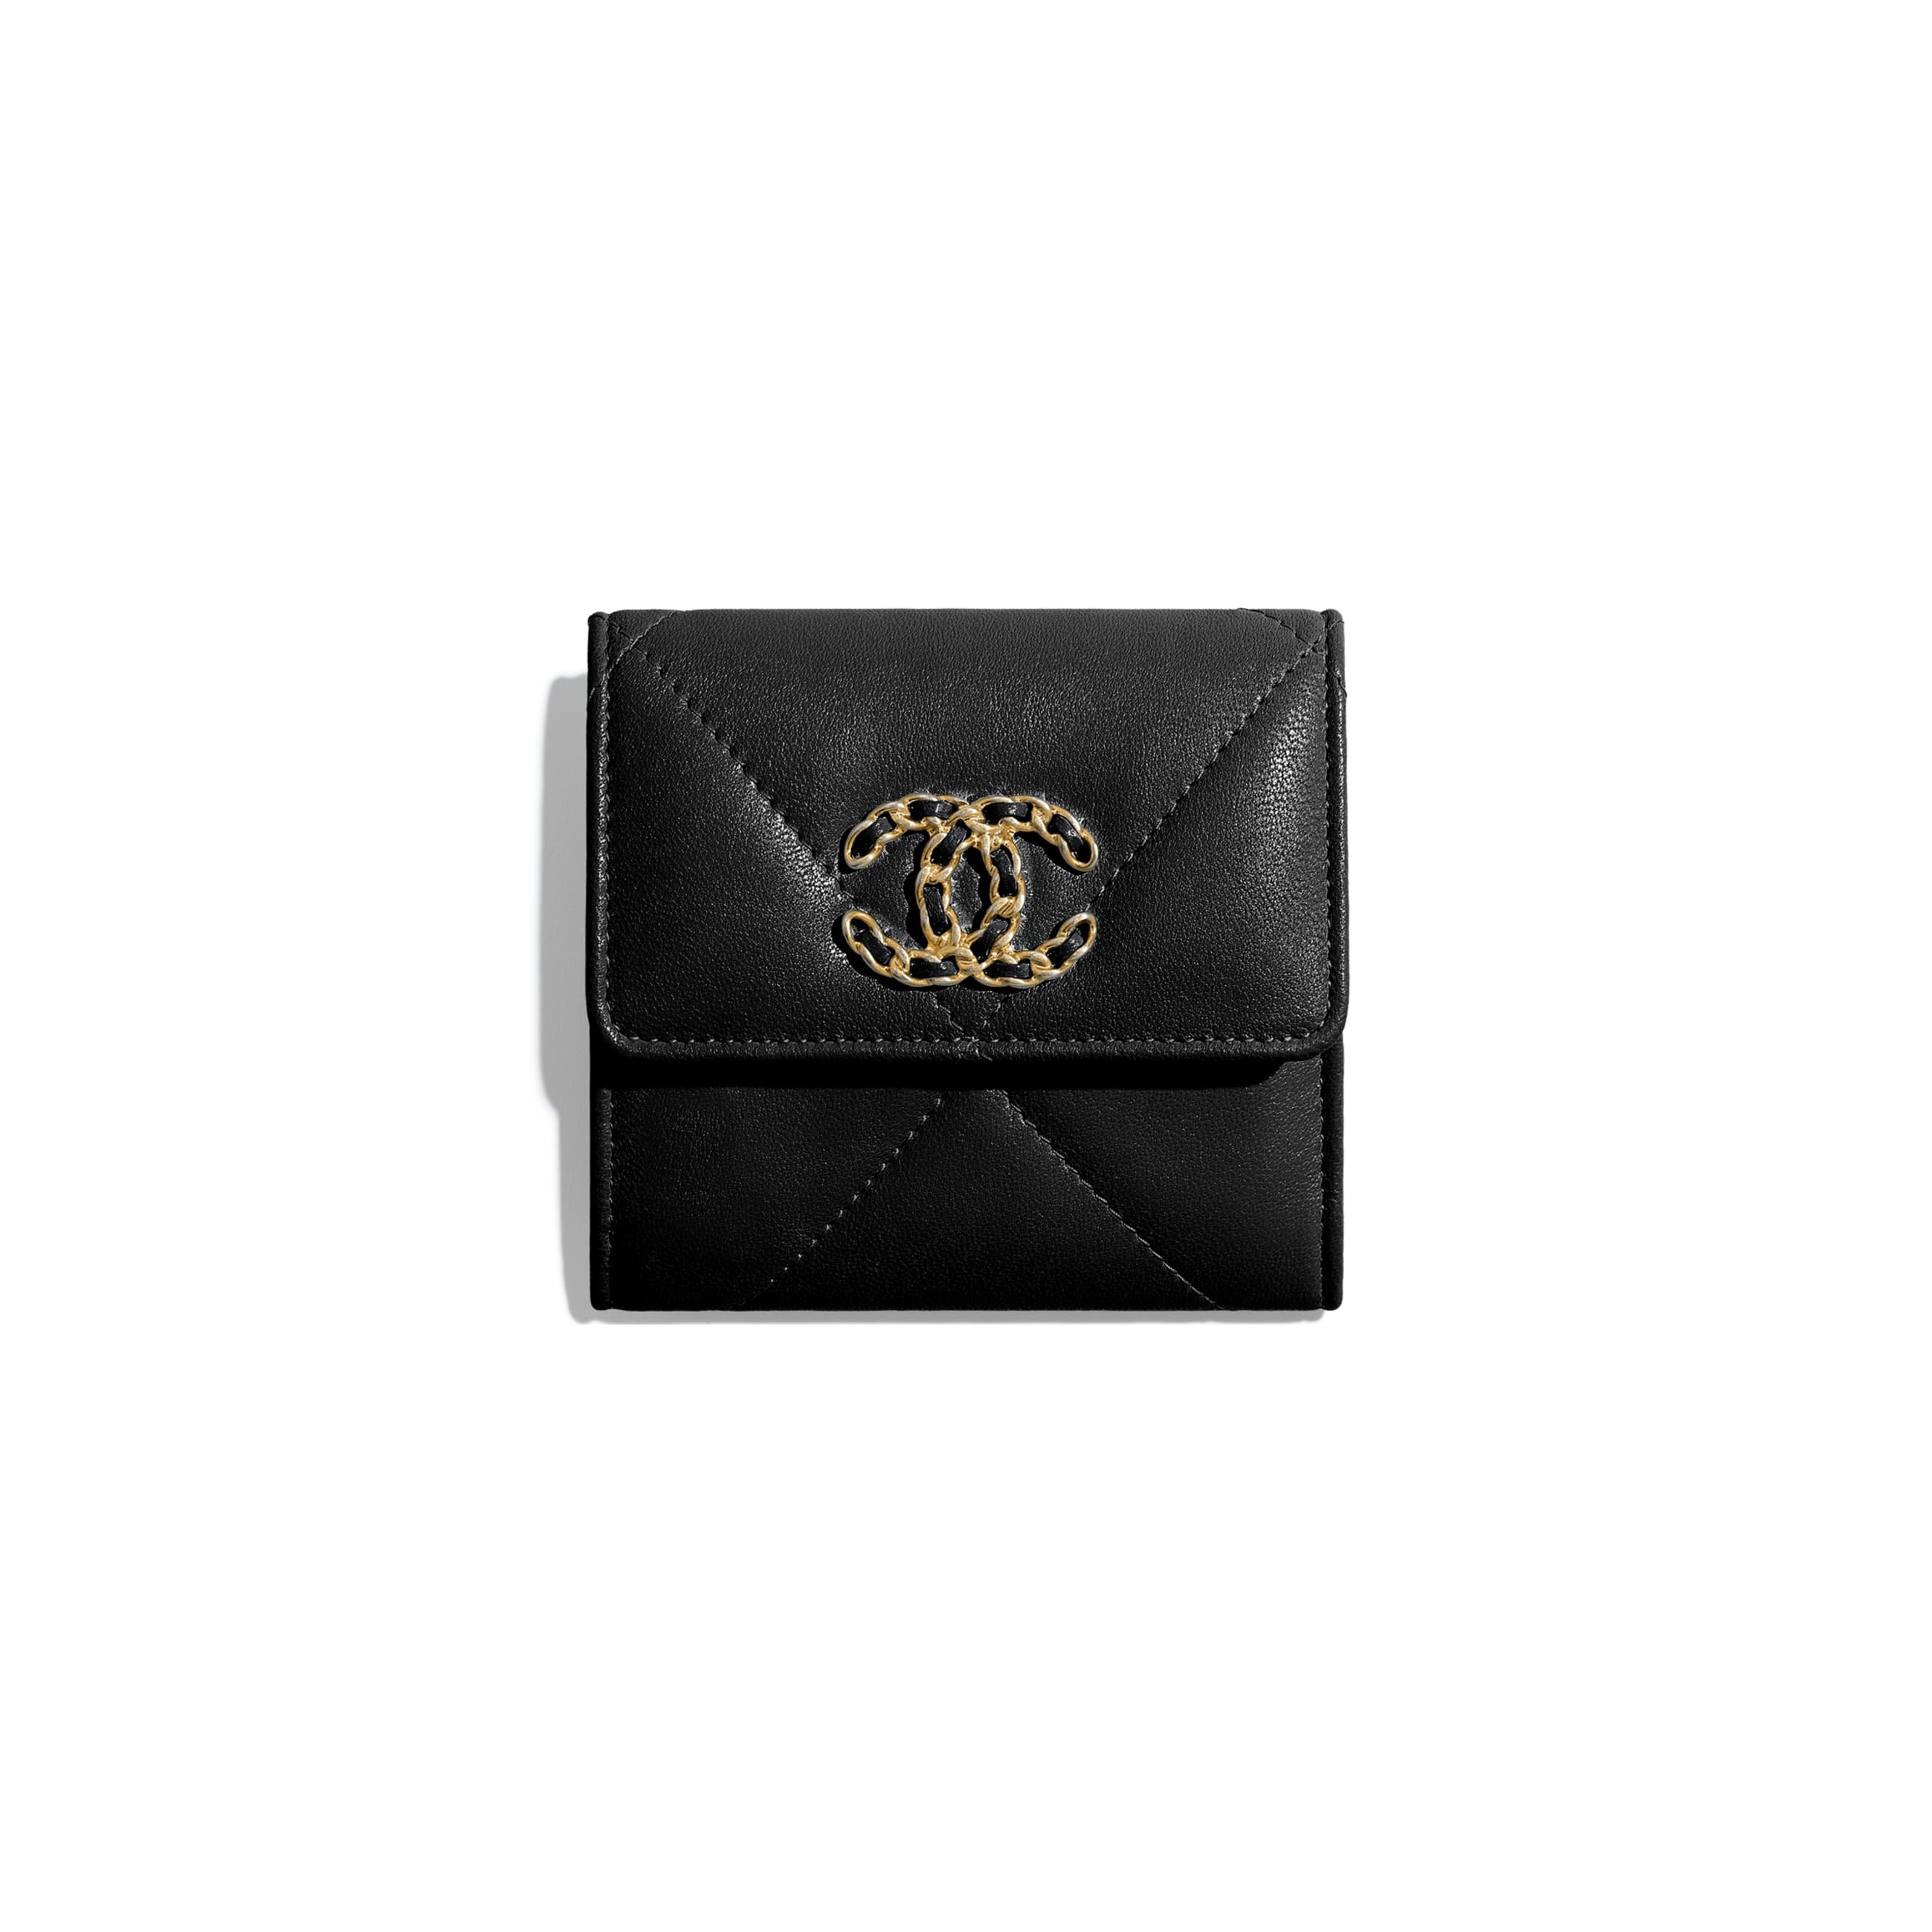 CHANEL 19 Small Flap Wallet - 1